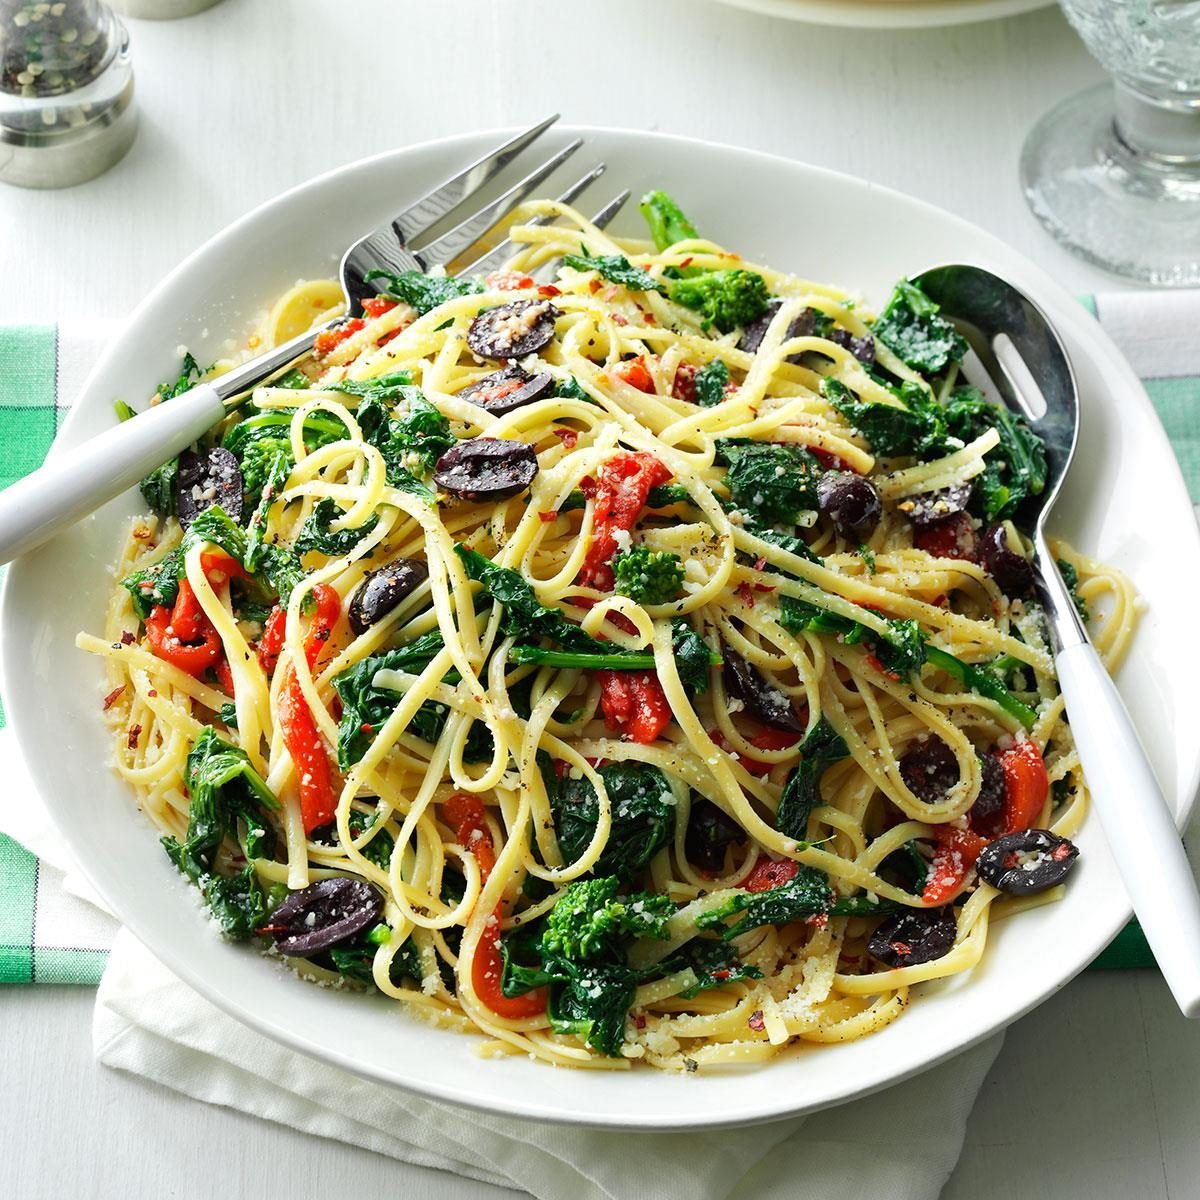 Summer Pasta Recipes - Linguine with Broccoli Rabe & Peppers